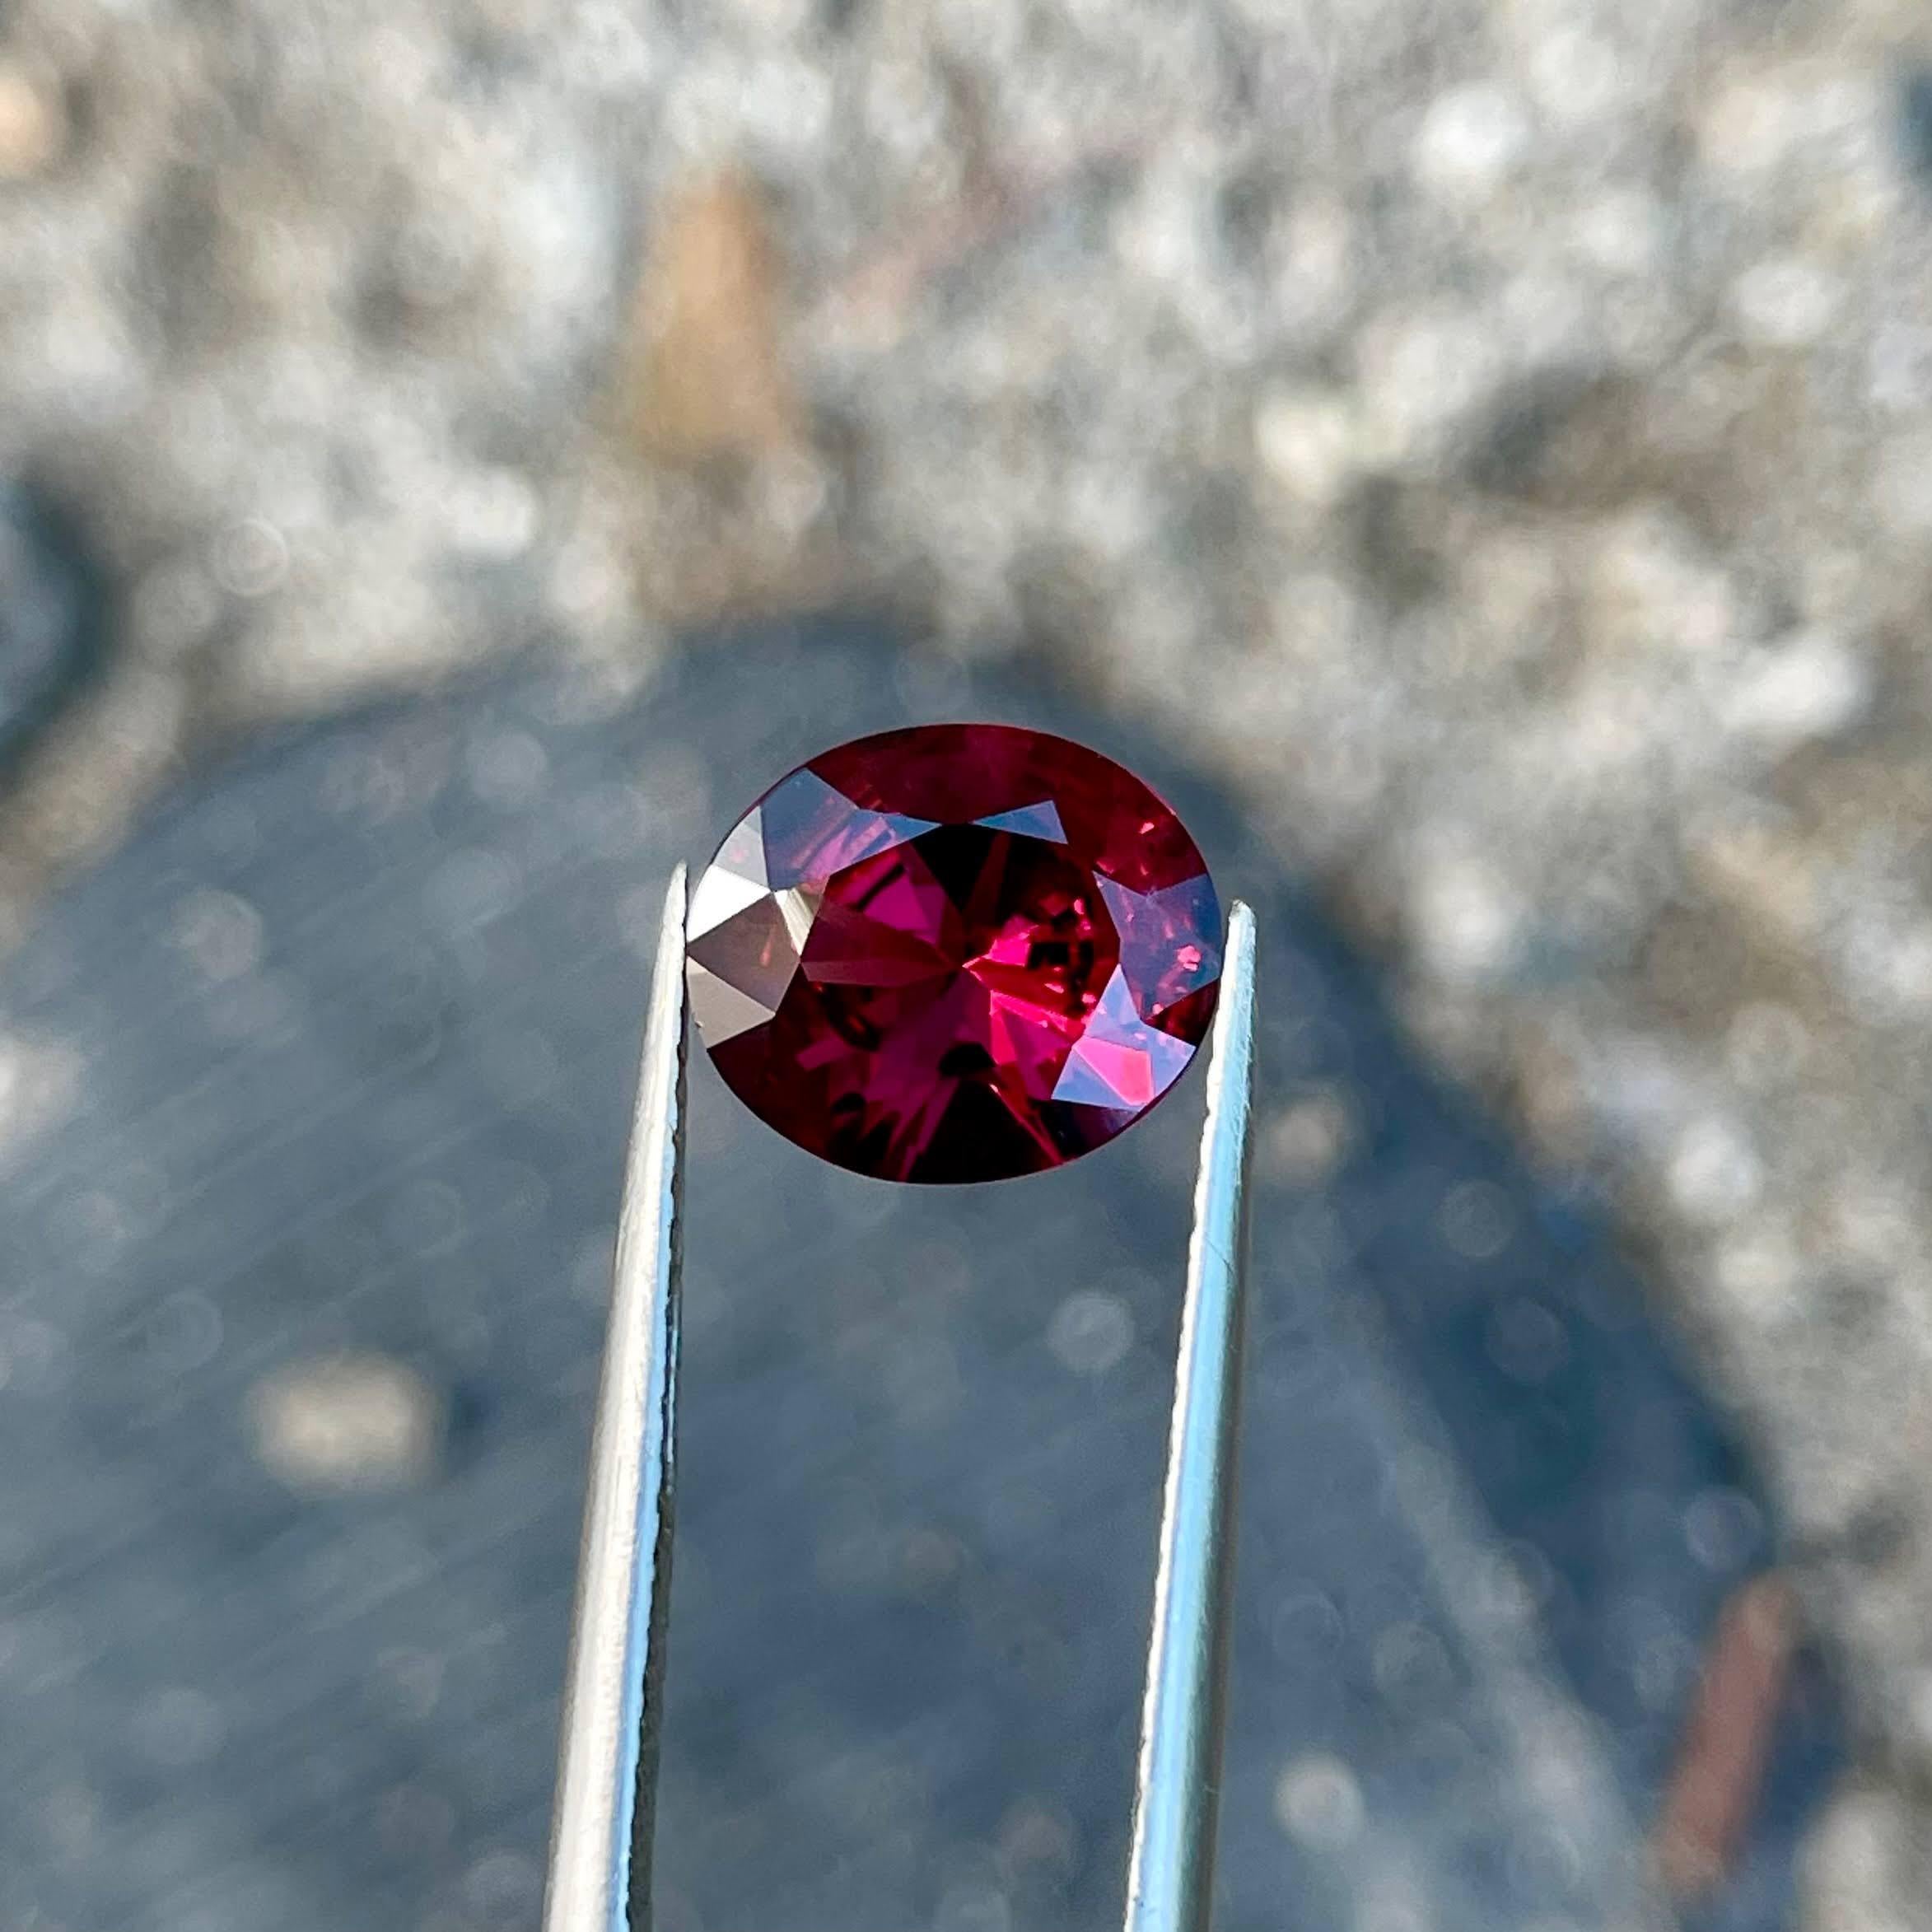 Weight 2.55 carats 
Dimensions 9.6x8.2x4.6 mm
Treatment none 
Origin Tanzania 
Clarity VVS
Shape oval 
Cut Custom Precision 




The 2.55 carat Reddish Garnet Stone, meticulously crafted into an Oval Cut, emanates the fiery allure of natural